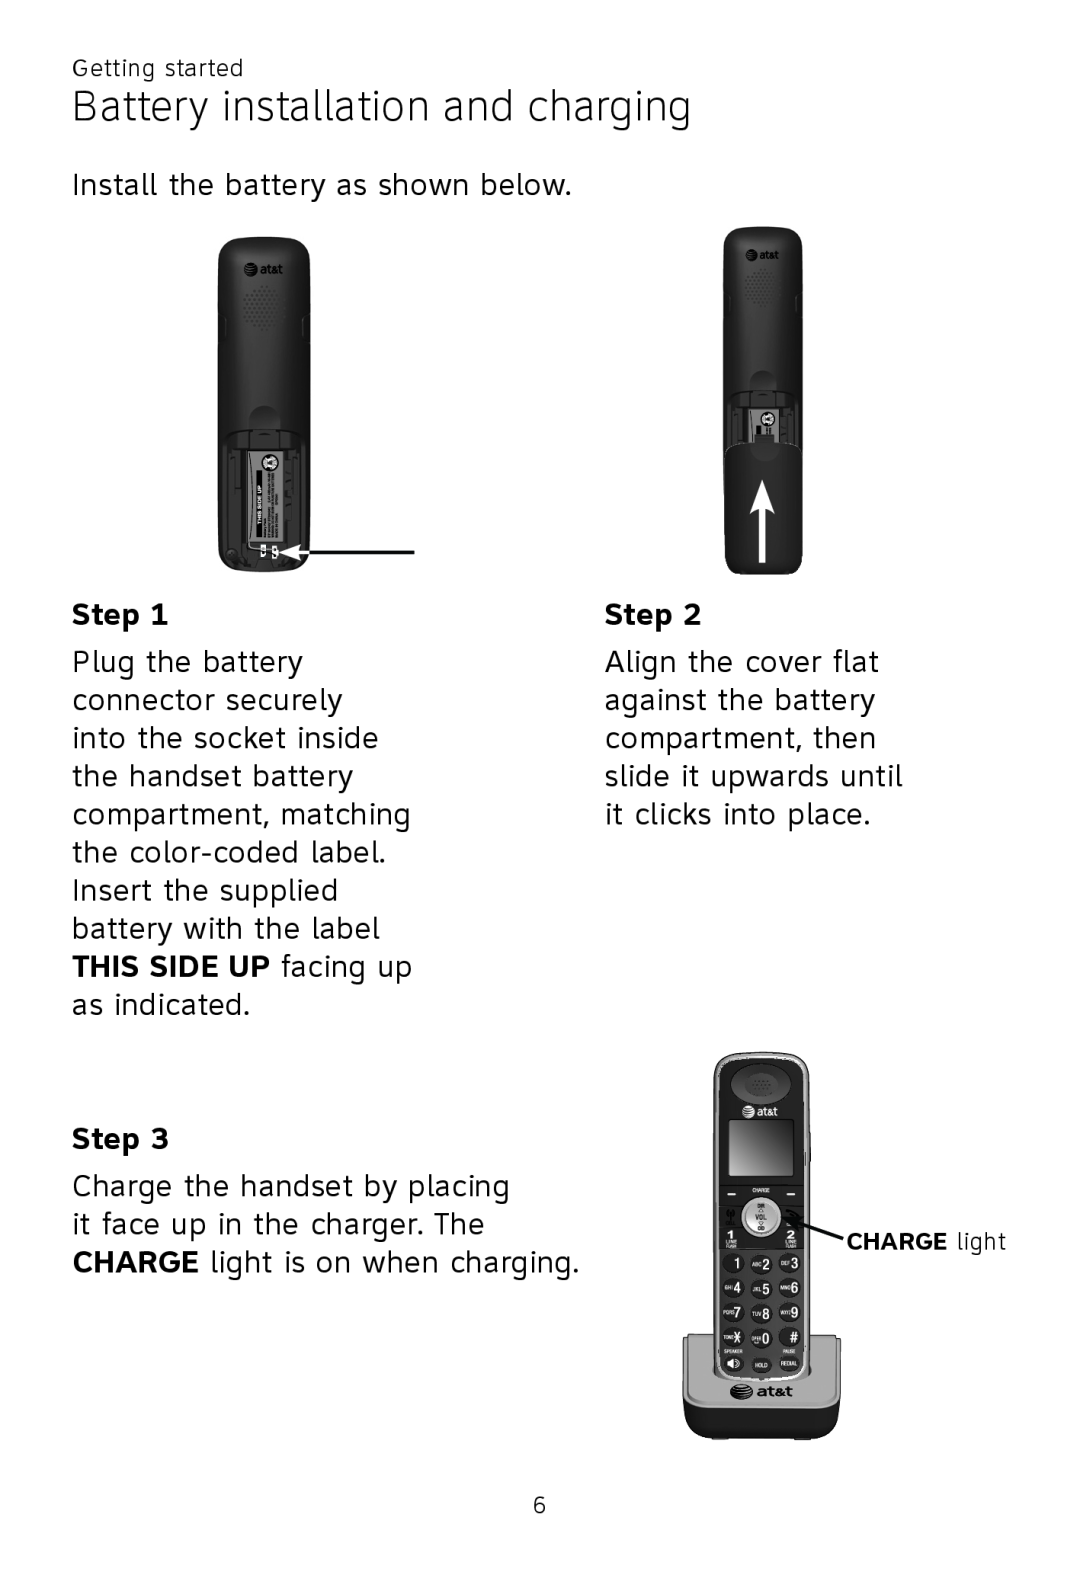 AT&T TL86009, TL86109, TL 86009 user manual Battery installation and charging, Step 